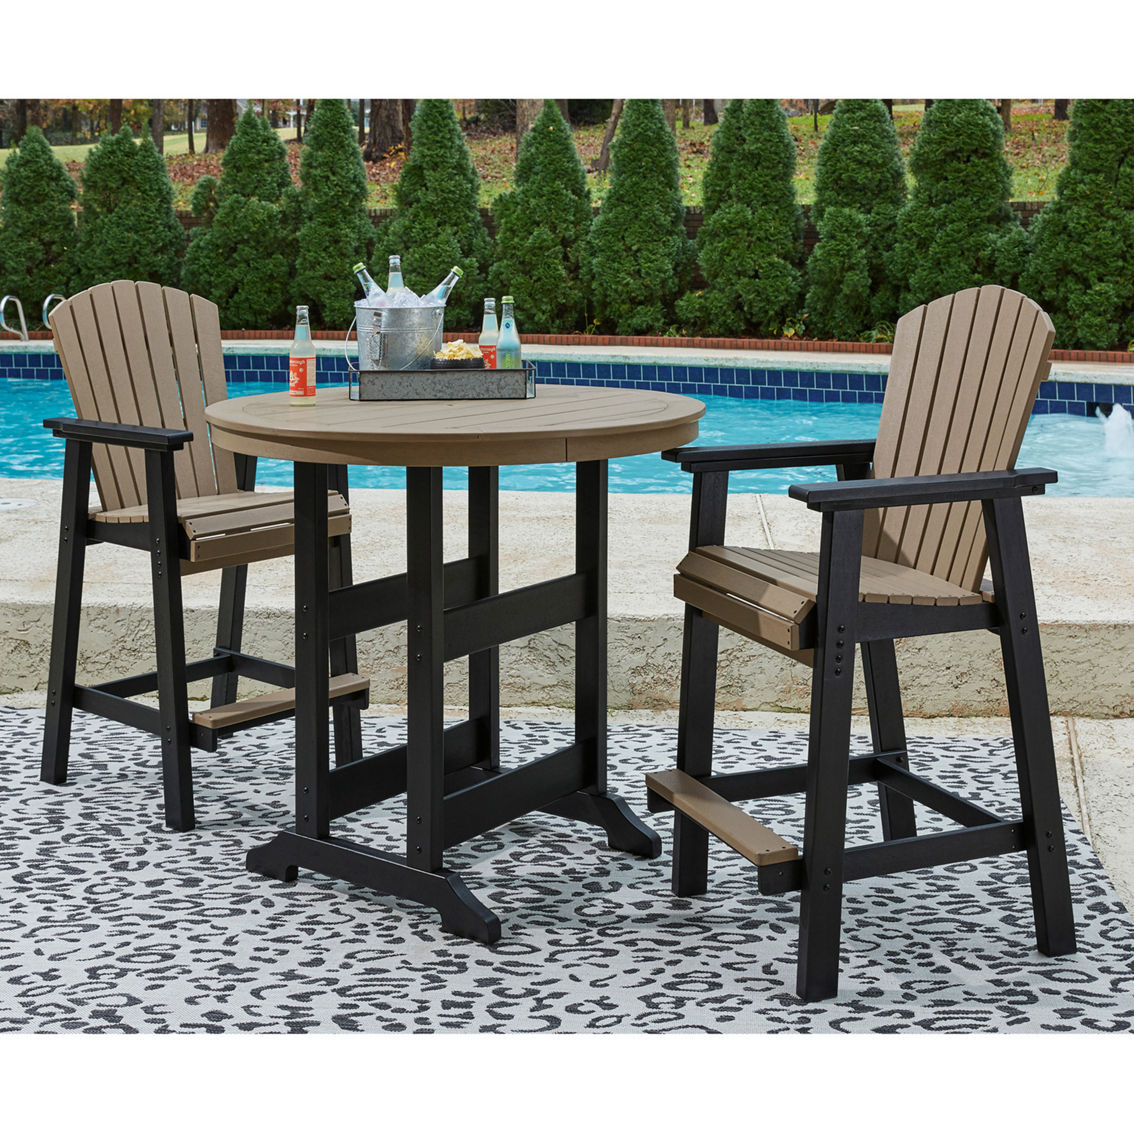 Signature Design by Ashley Fairen Trail 5 pc. Outdoor Bar Table Set - Image 2 of 6